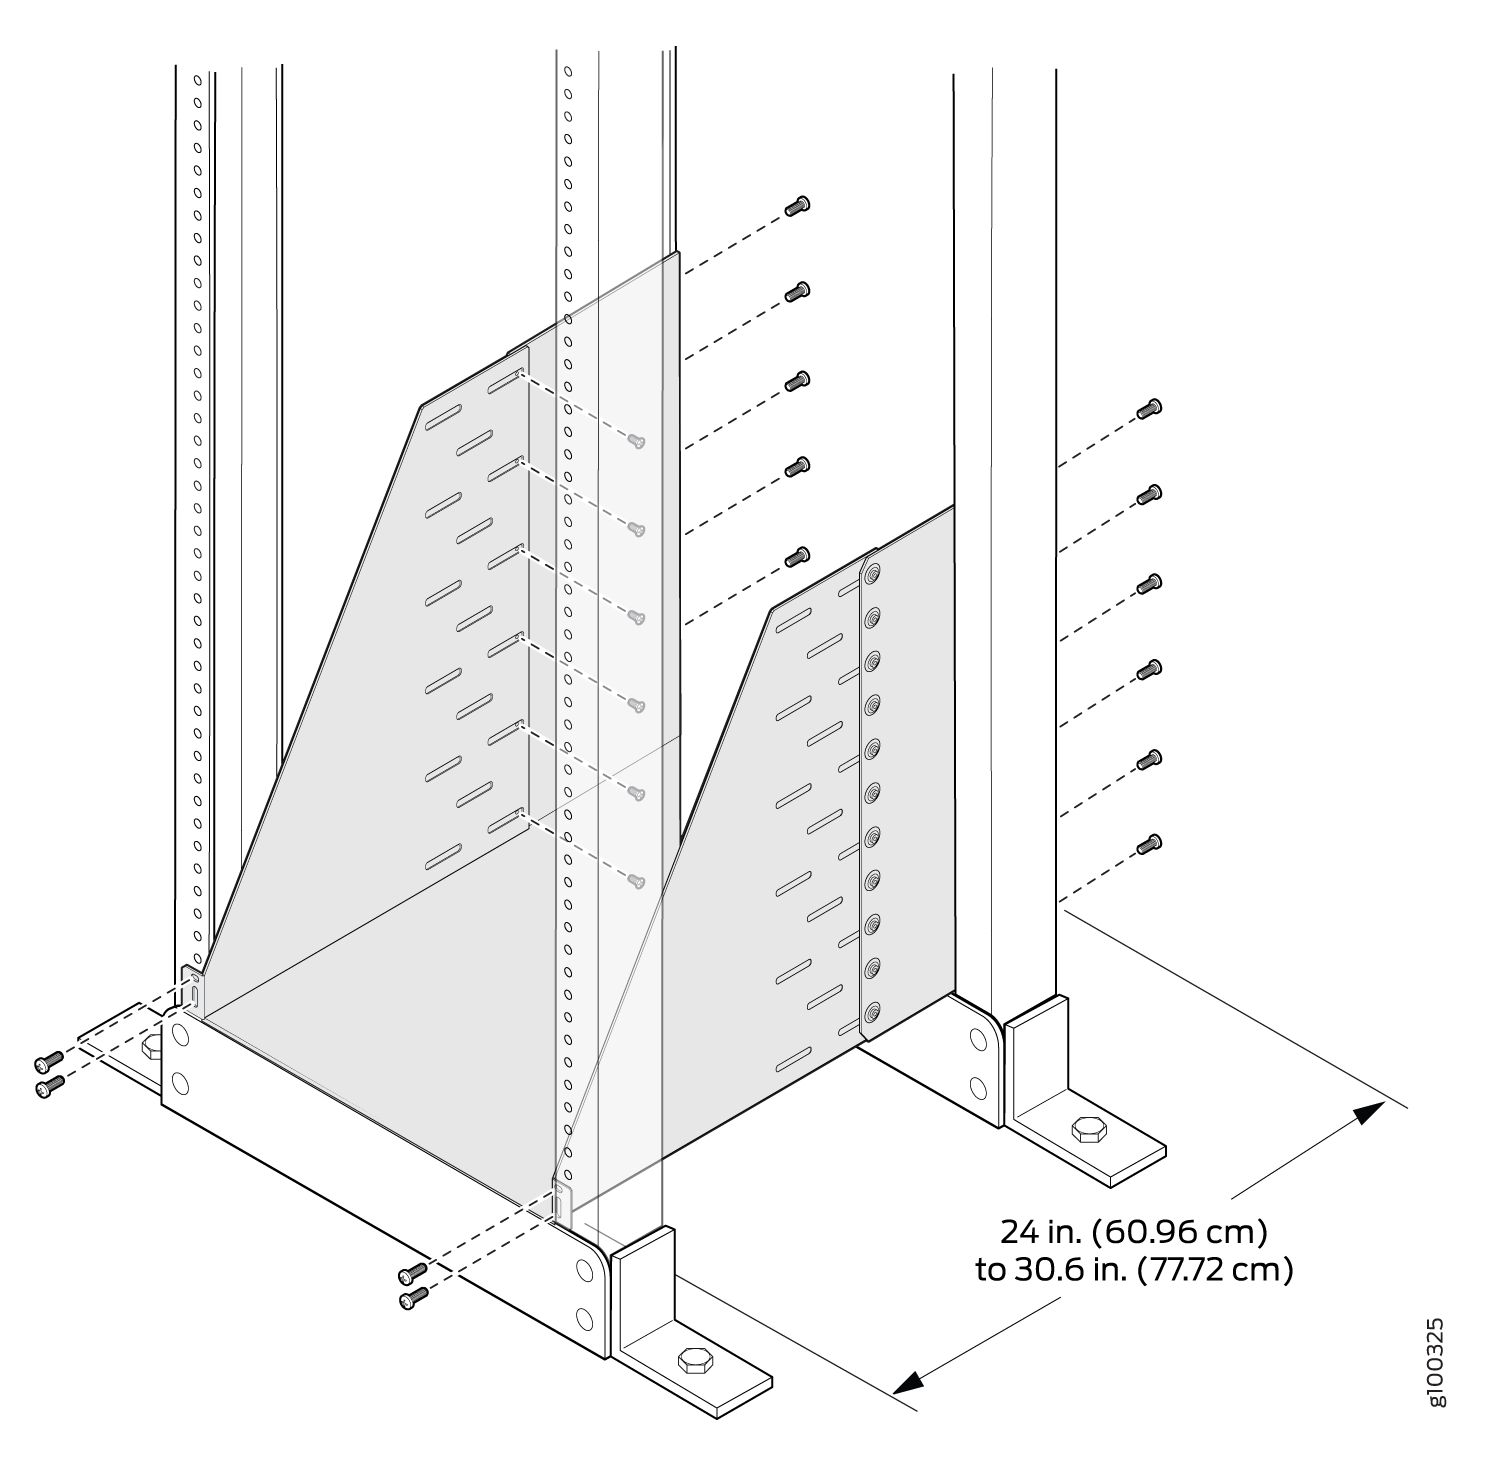 Installing a Four-Post Mounting Shelf